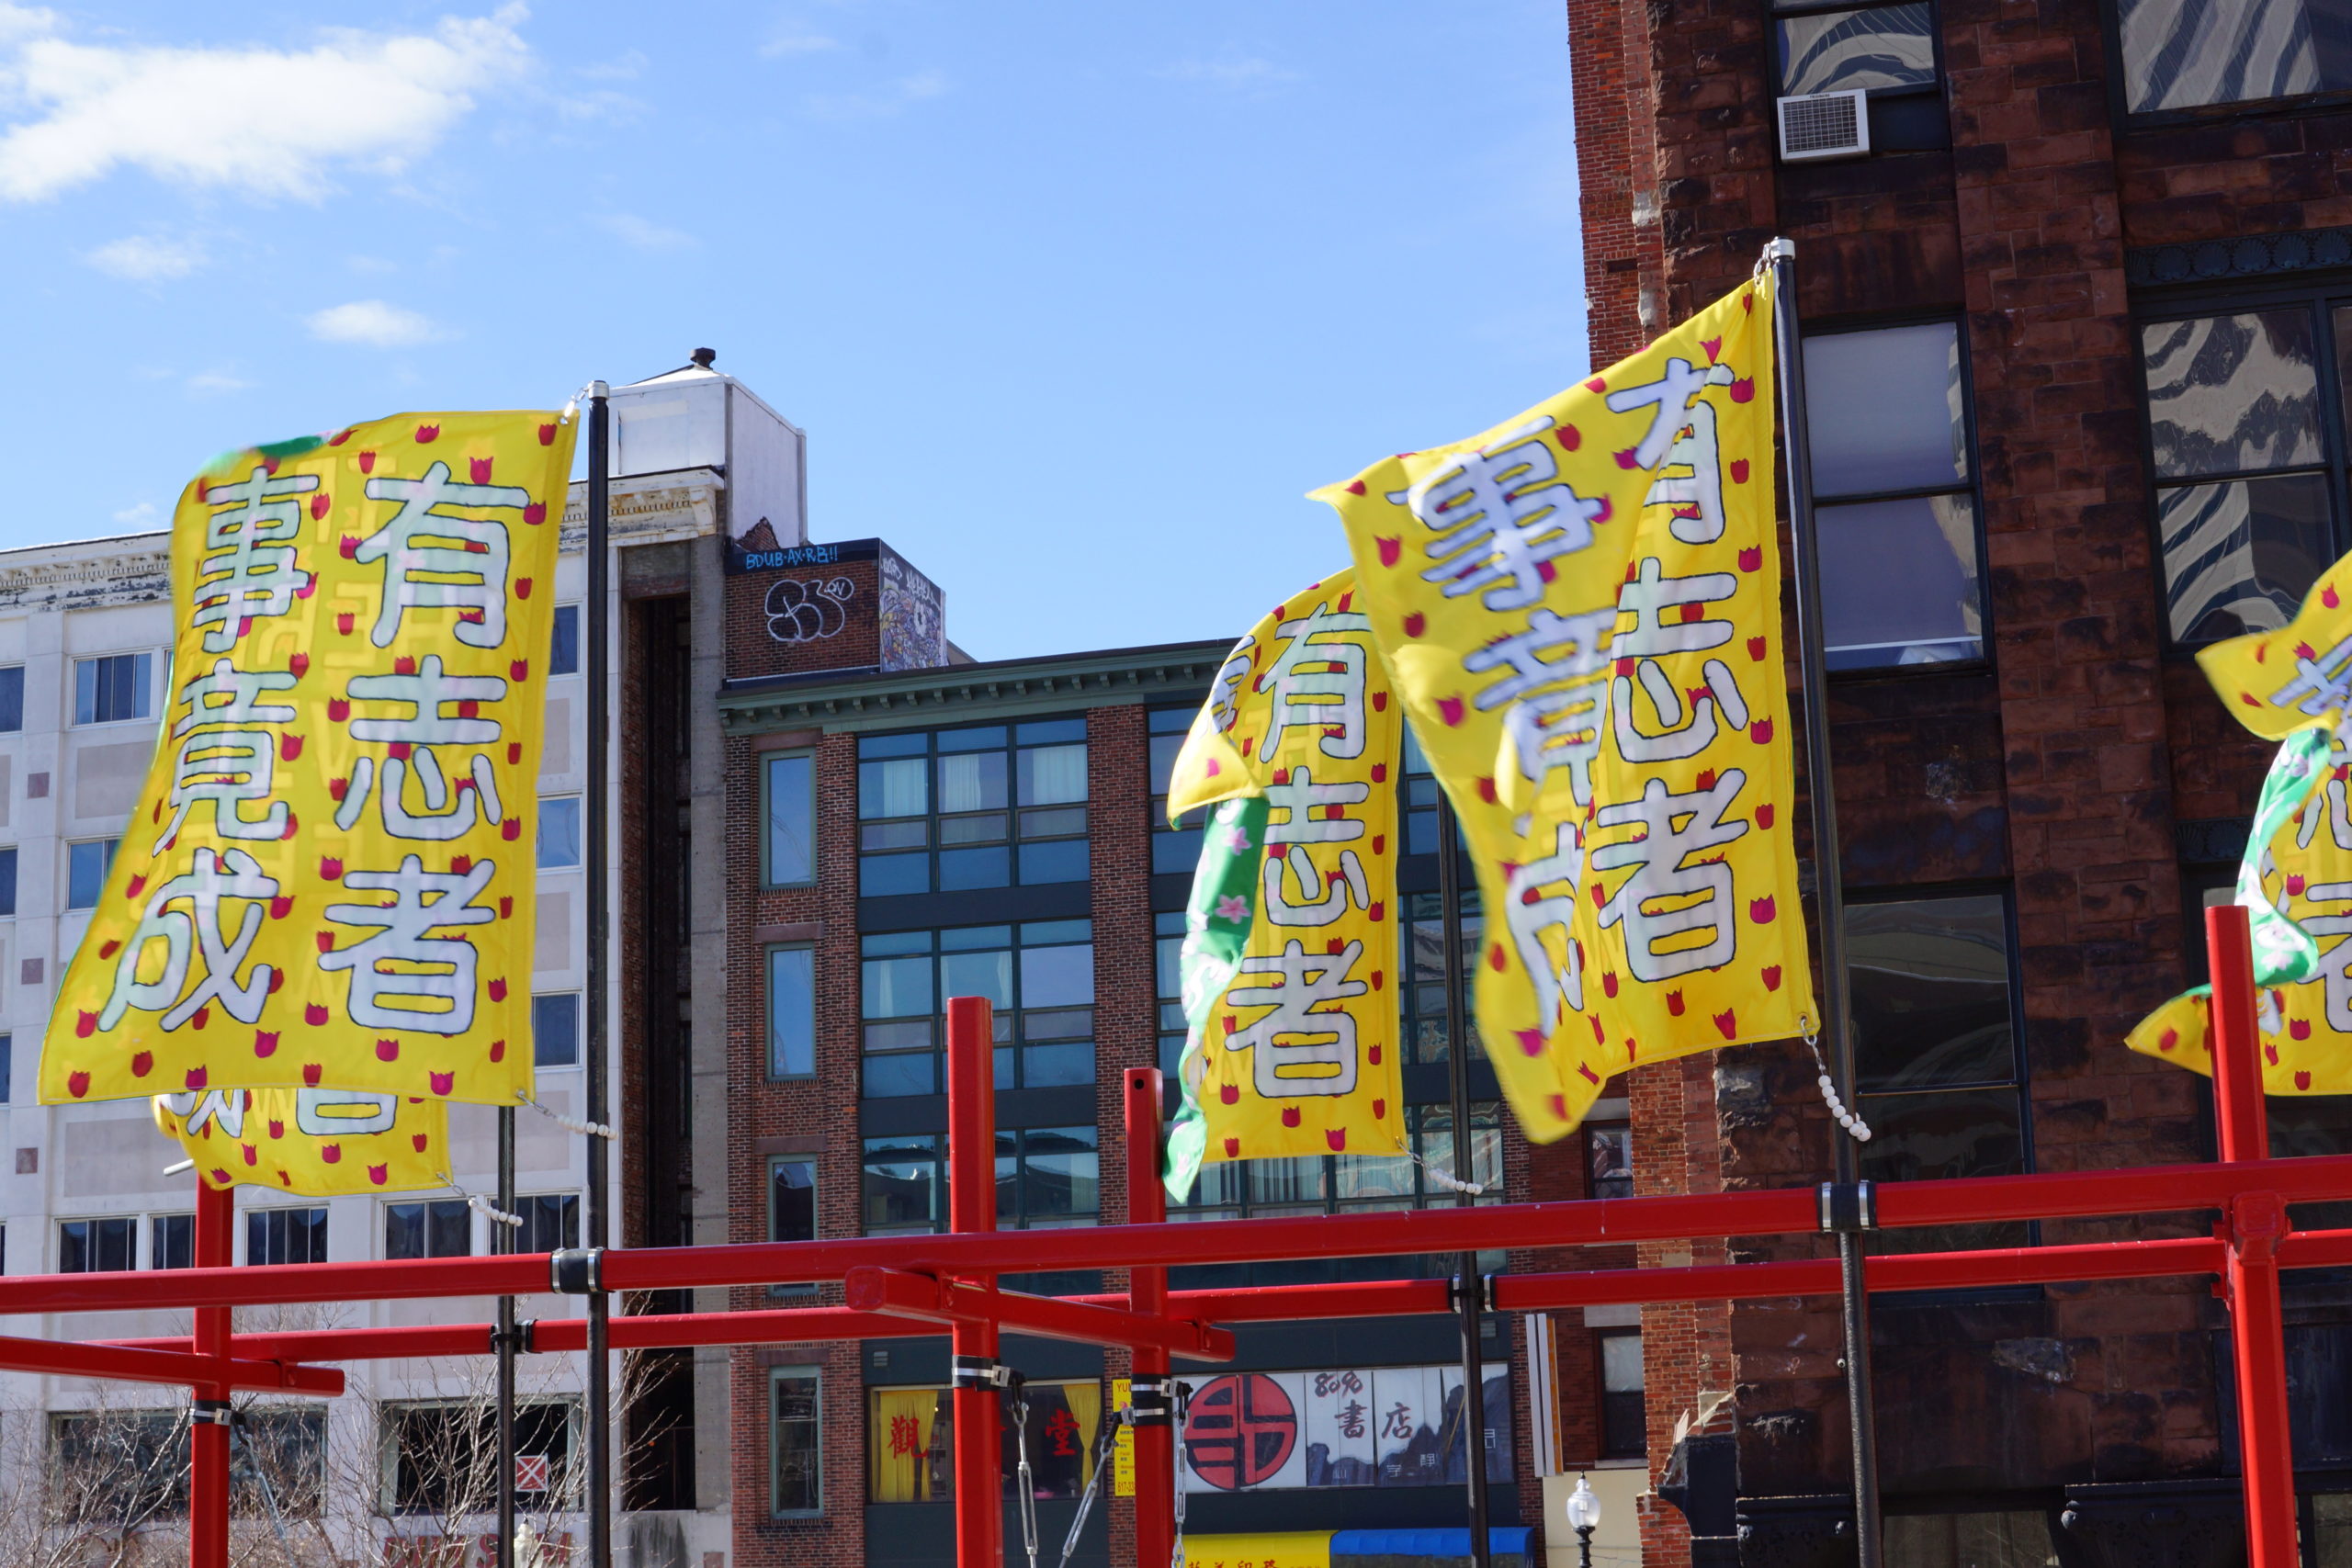 Four rectangular banners billow in the wind at the top of a red steel structure. Large white Chinese characters on the banners reads 